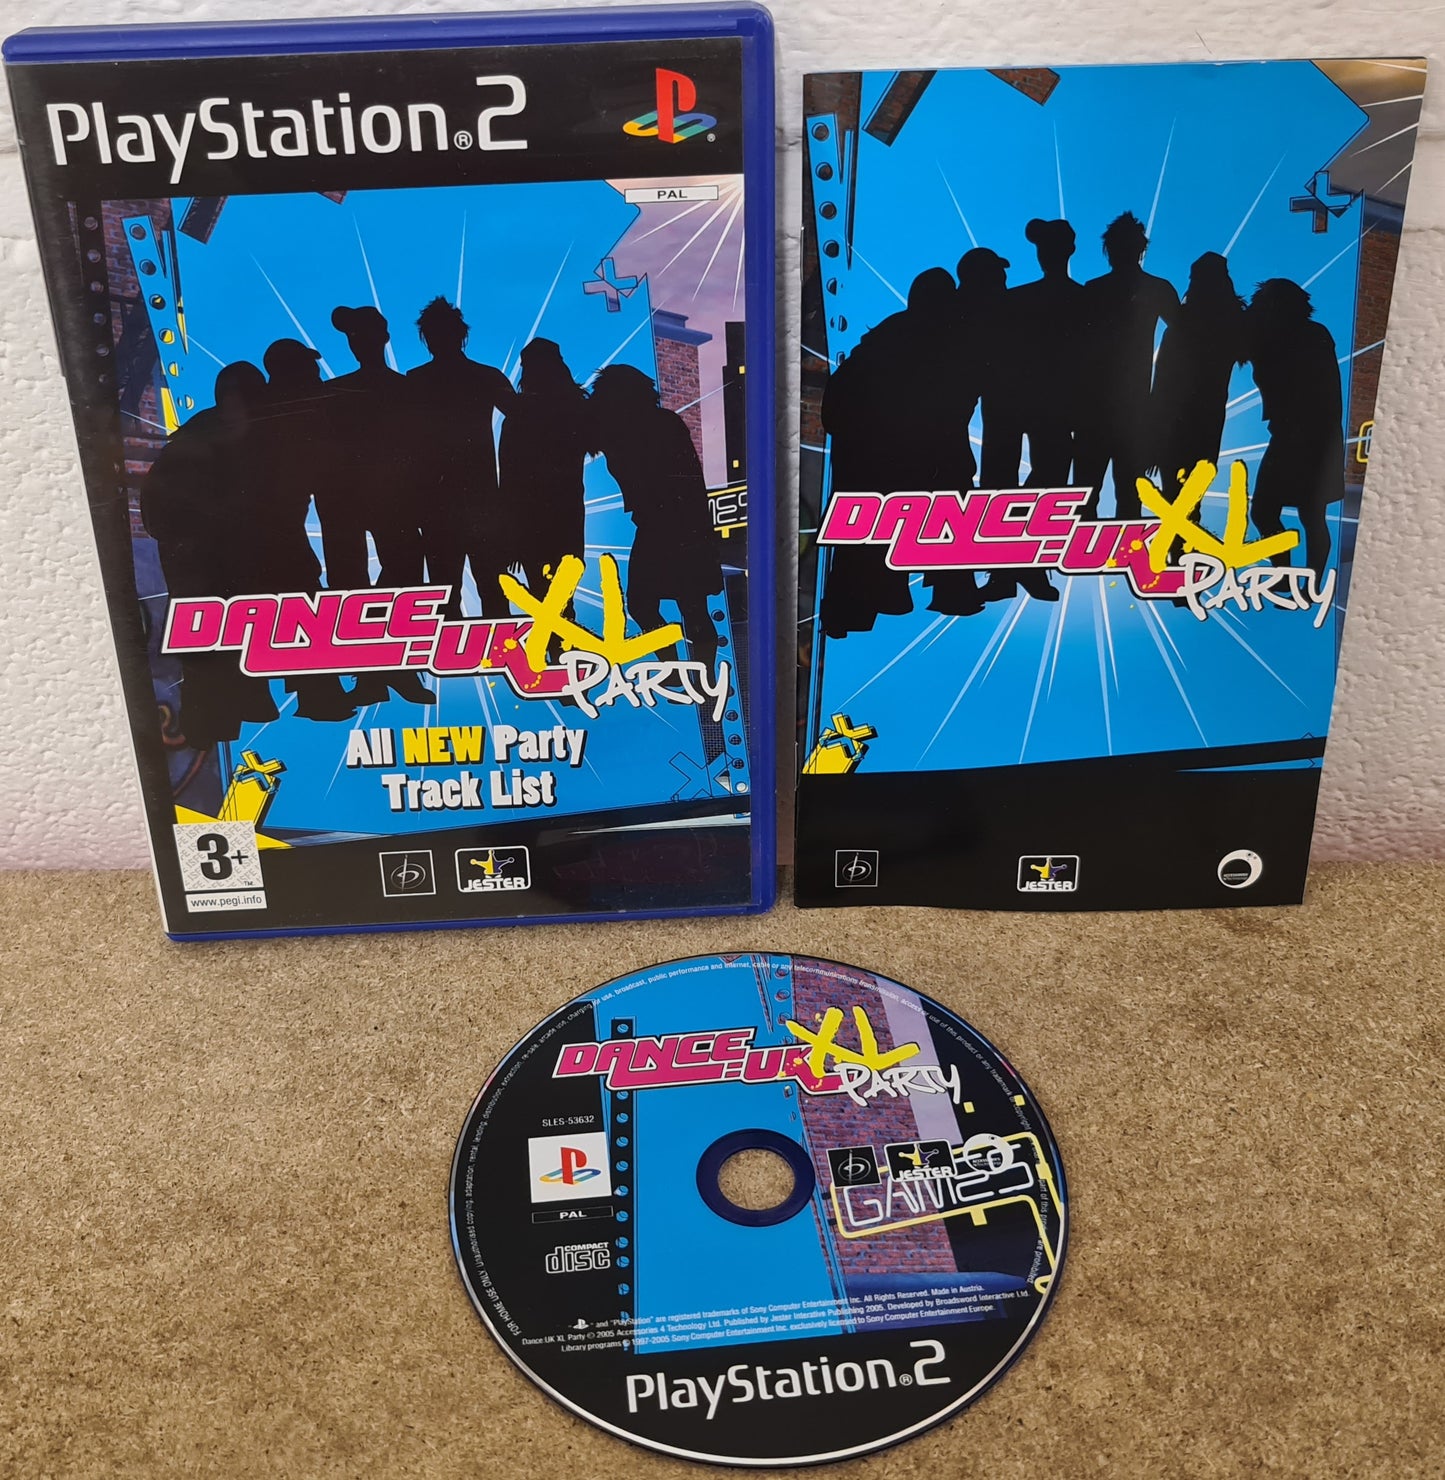 Dance UK XL Party Sony Playstation 2 (PS2) Game